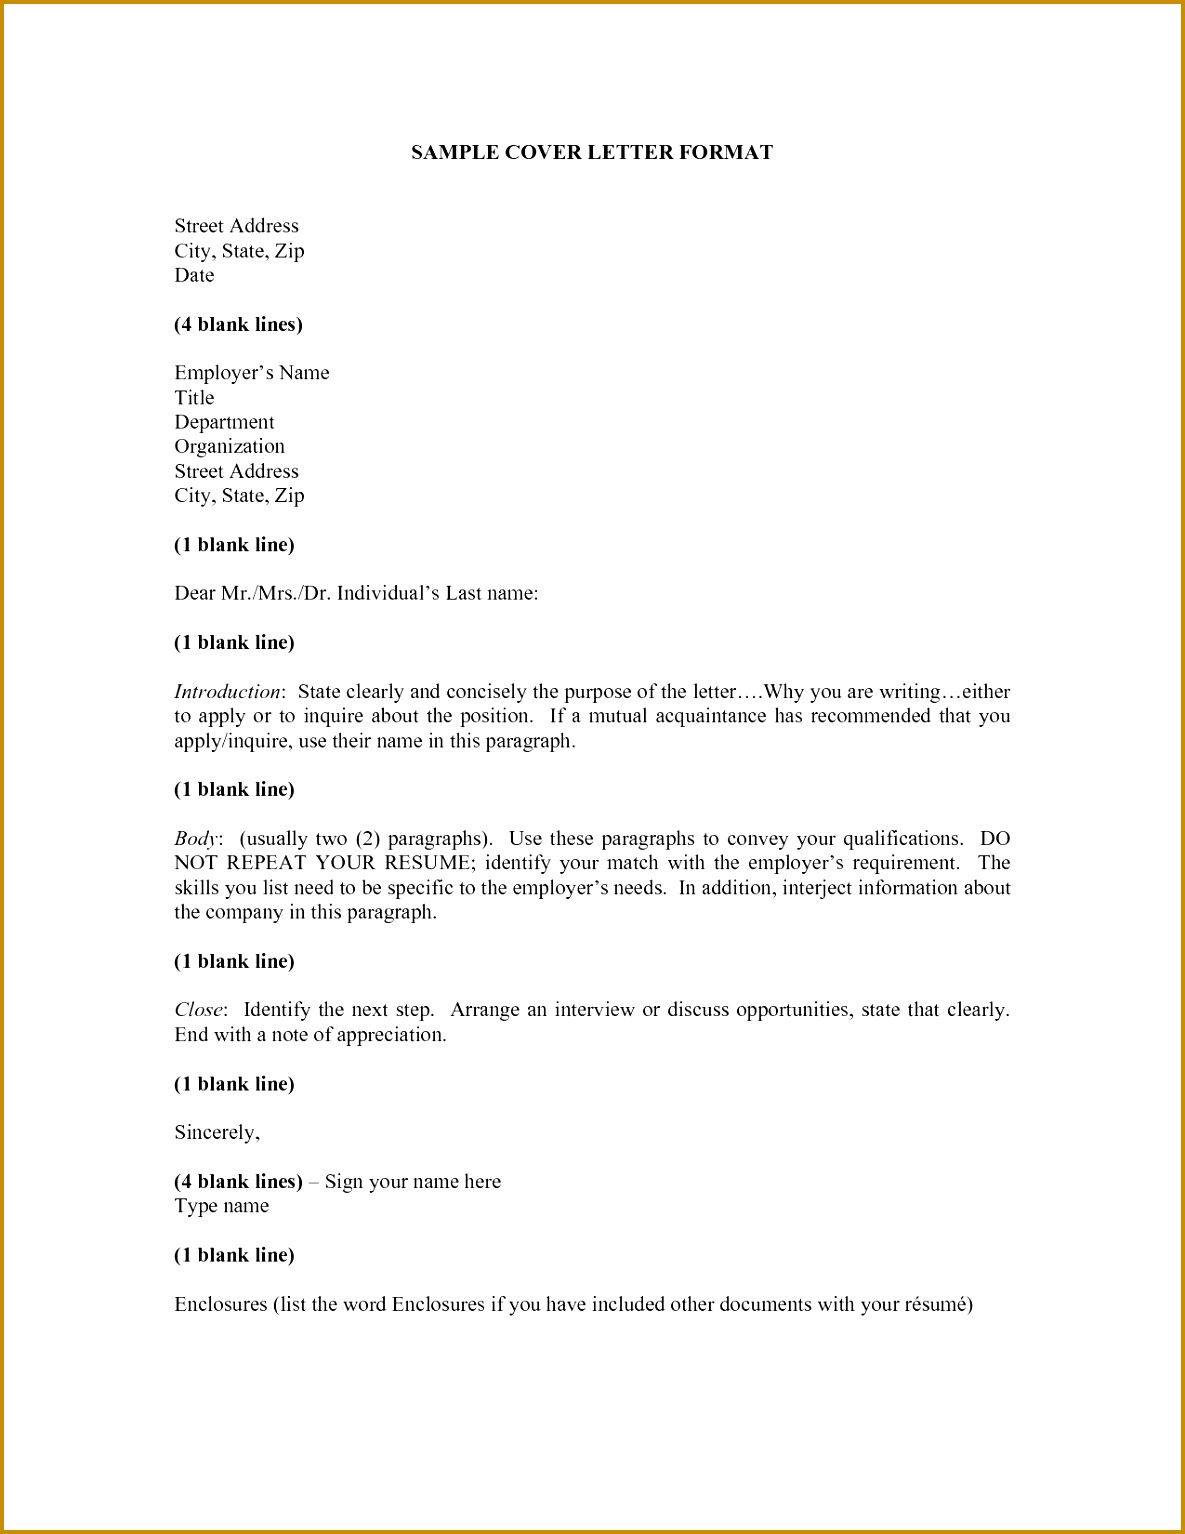 How to Start Cover Letter without Name Awesome How to Address A Cover Letter 9 Steps 15341185